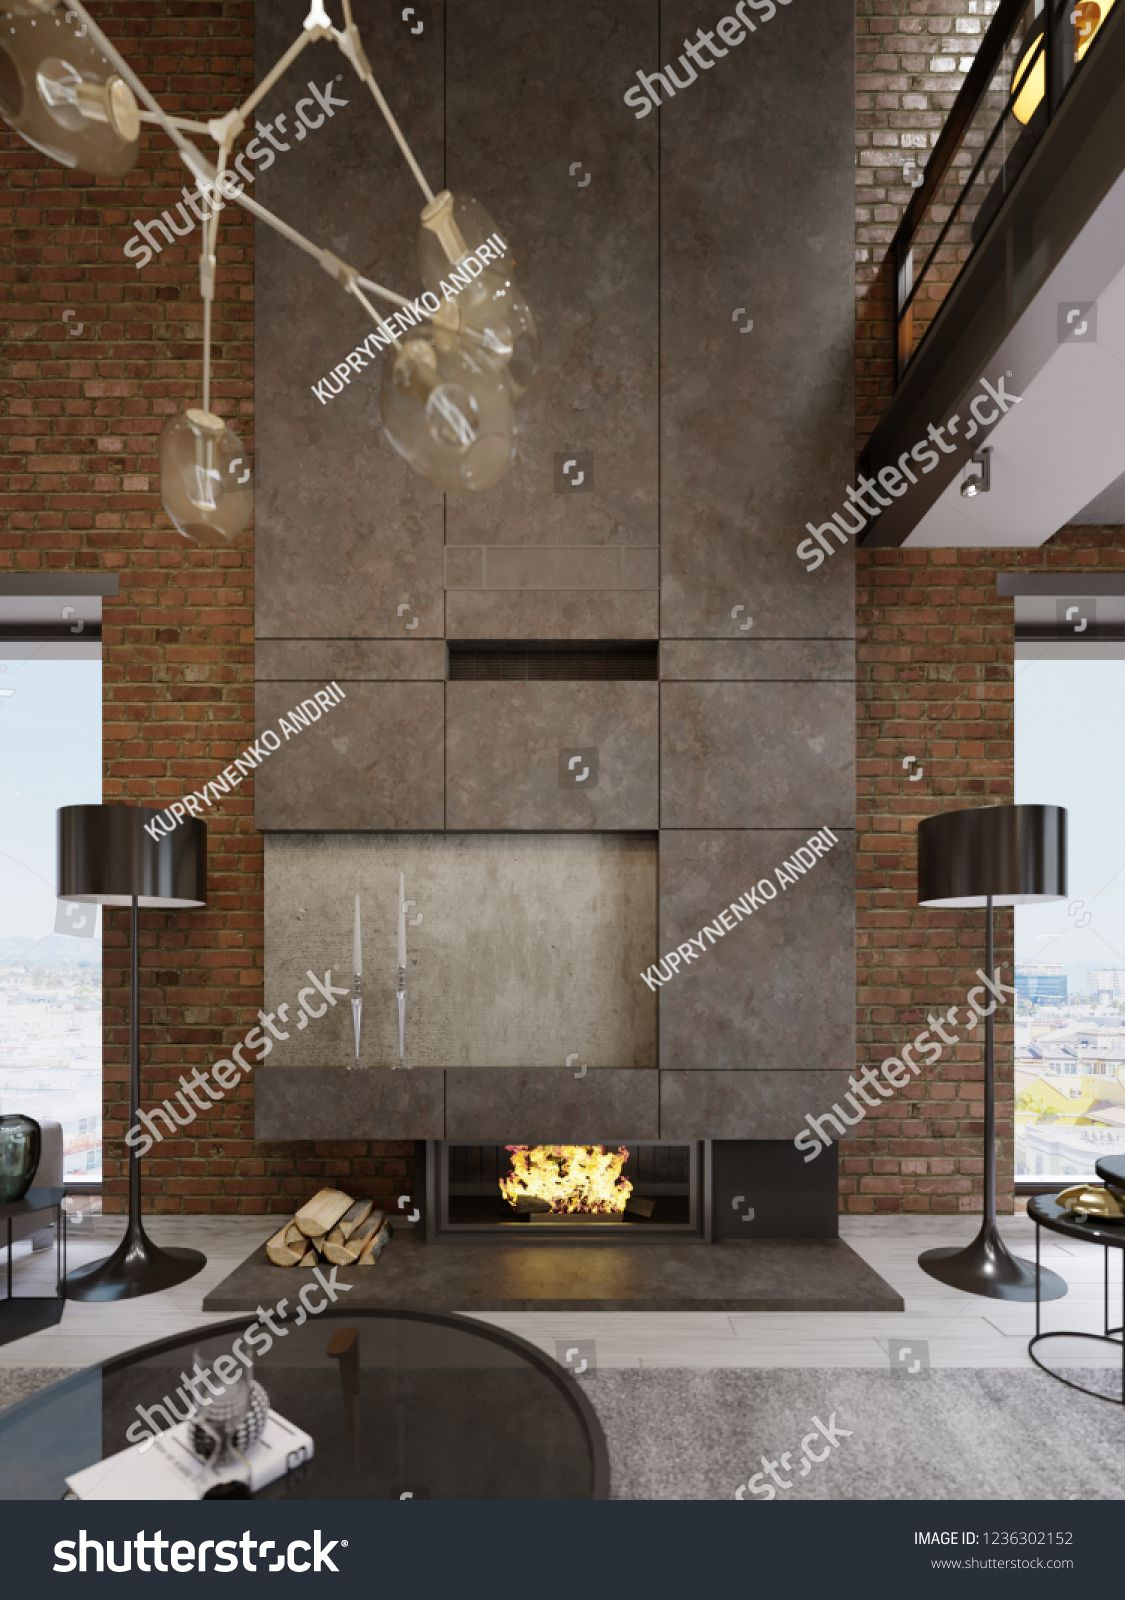 Large High Concrete Fireplace With Built In Firebox With regarding size 1125 X 1600